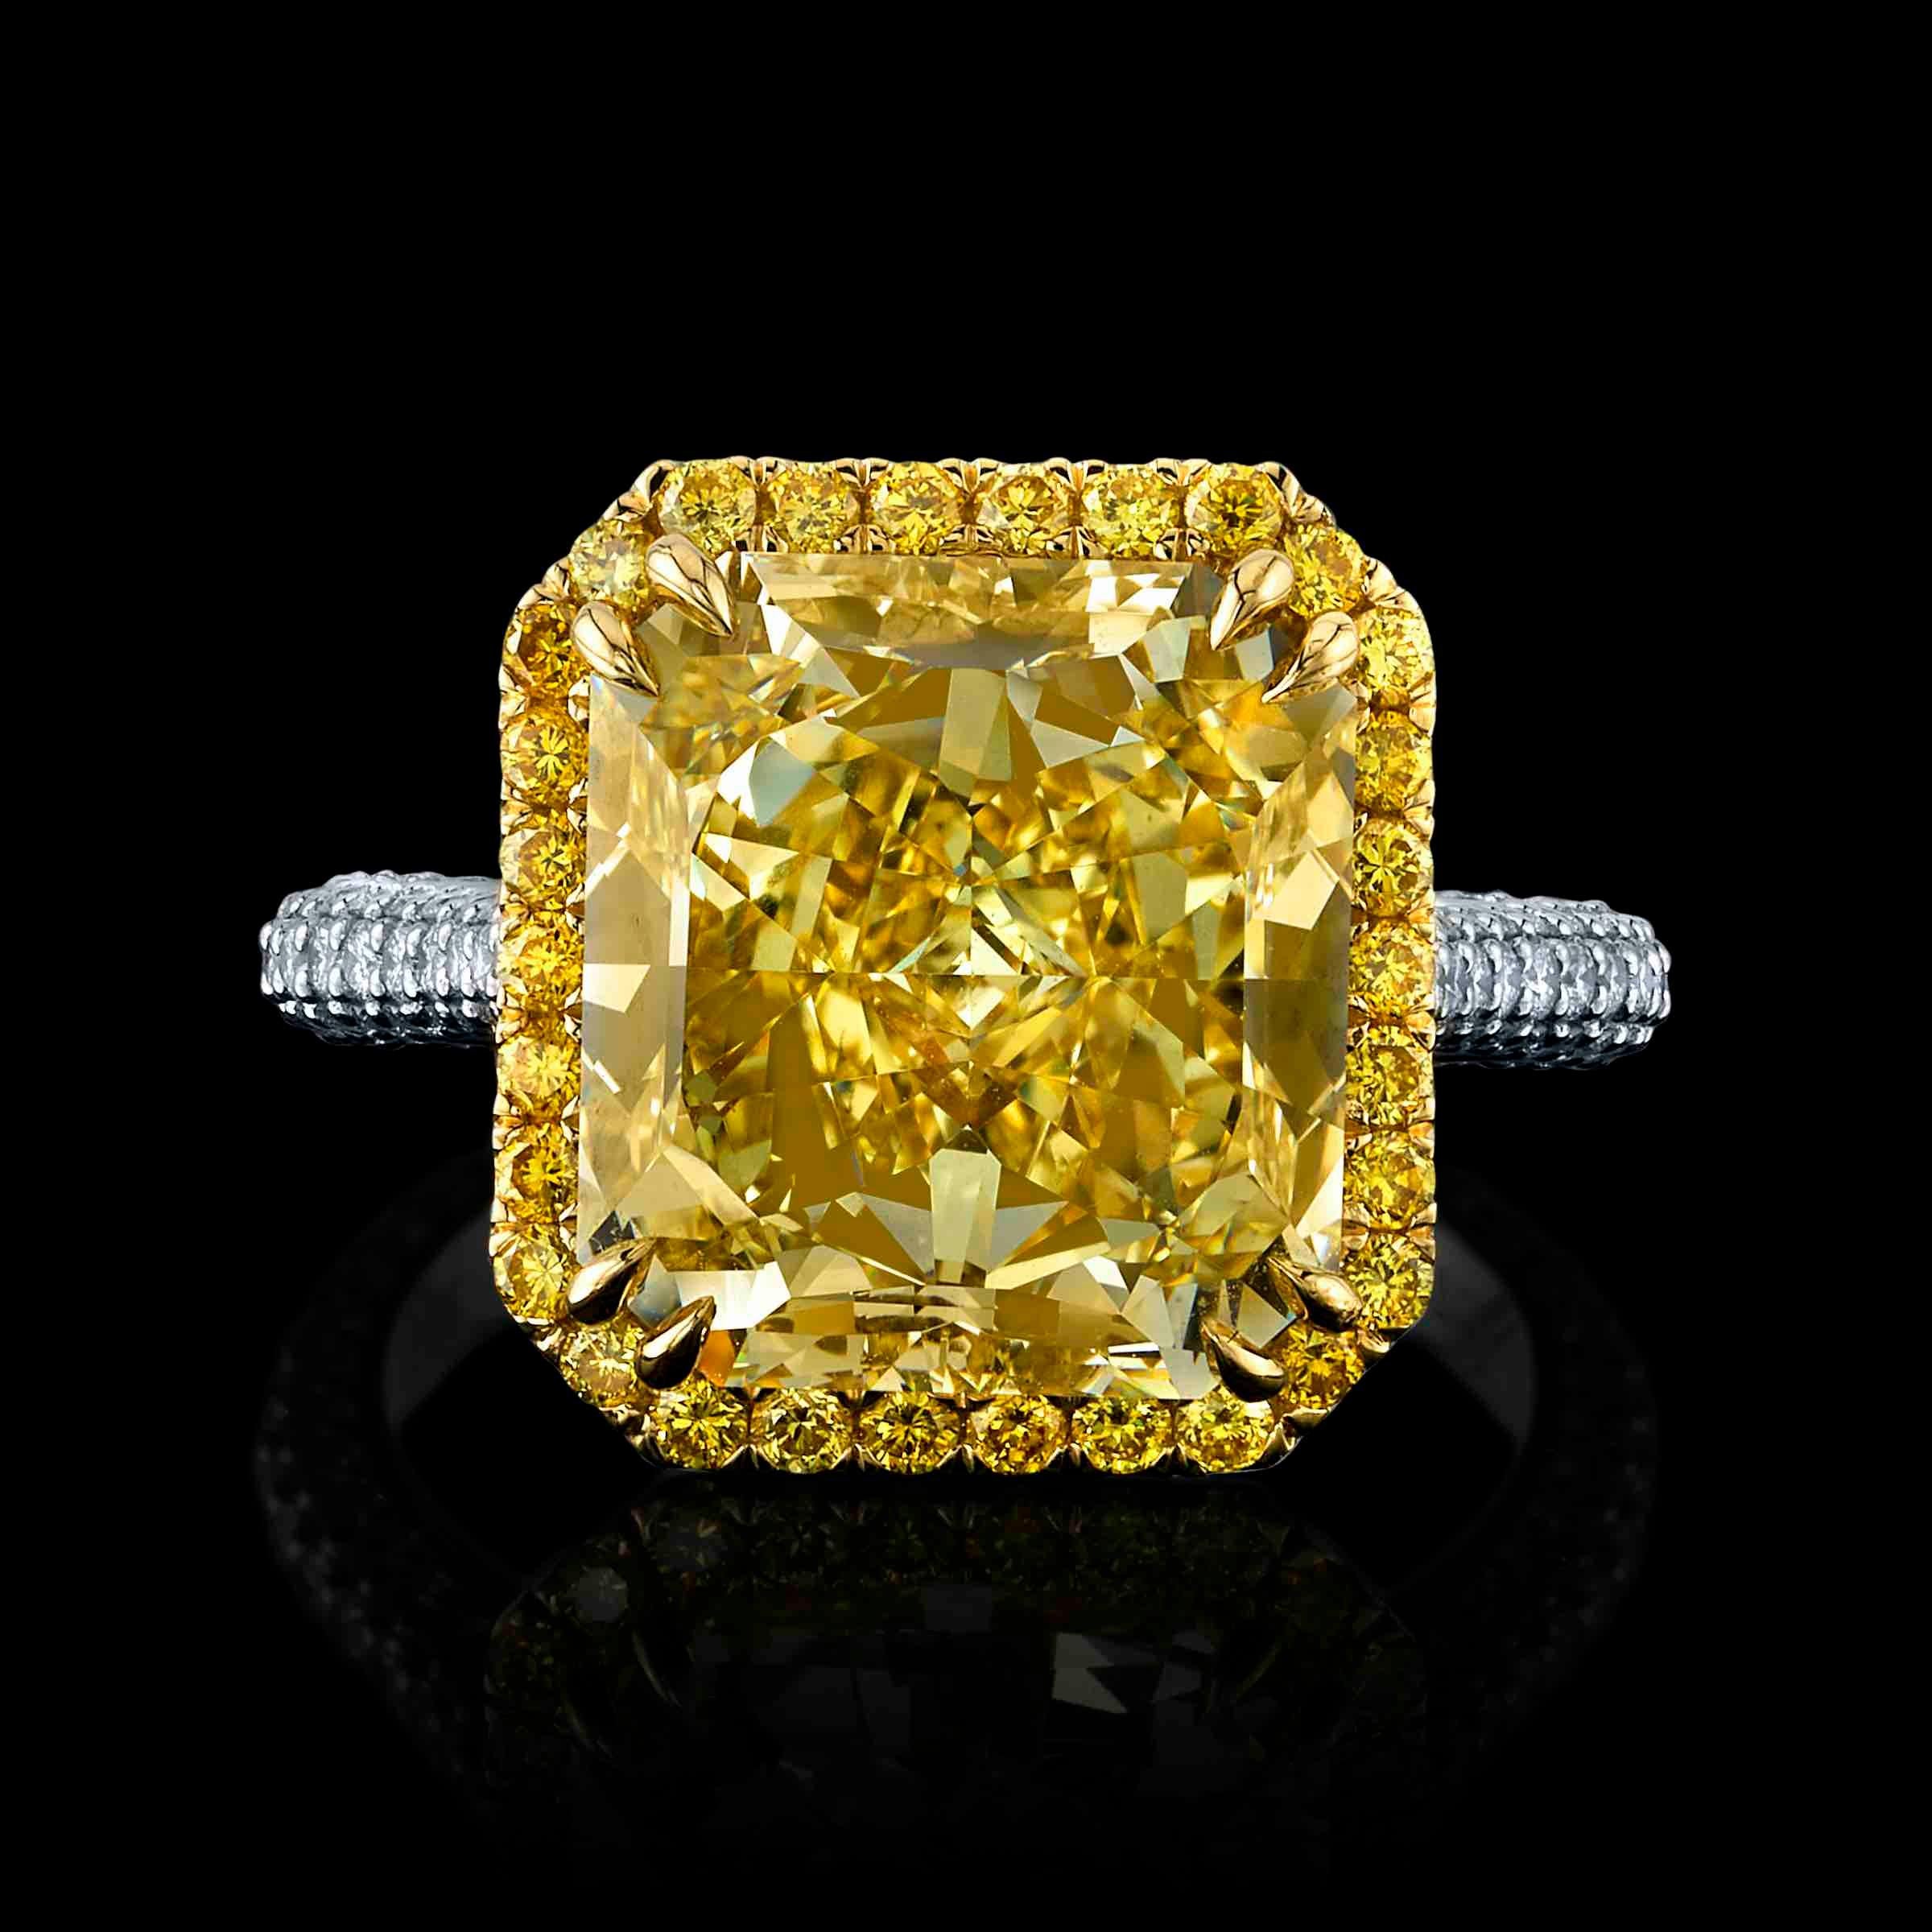 Modern GIA Certified, Spectacular 8.02ct Radiant, Fancy Yellow Diamond, IF Clarity